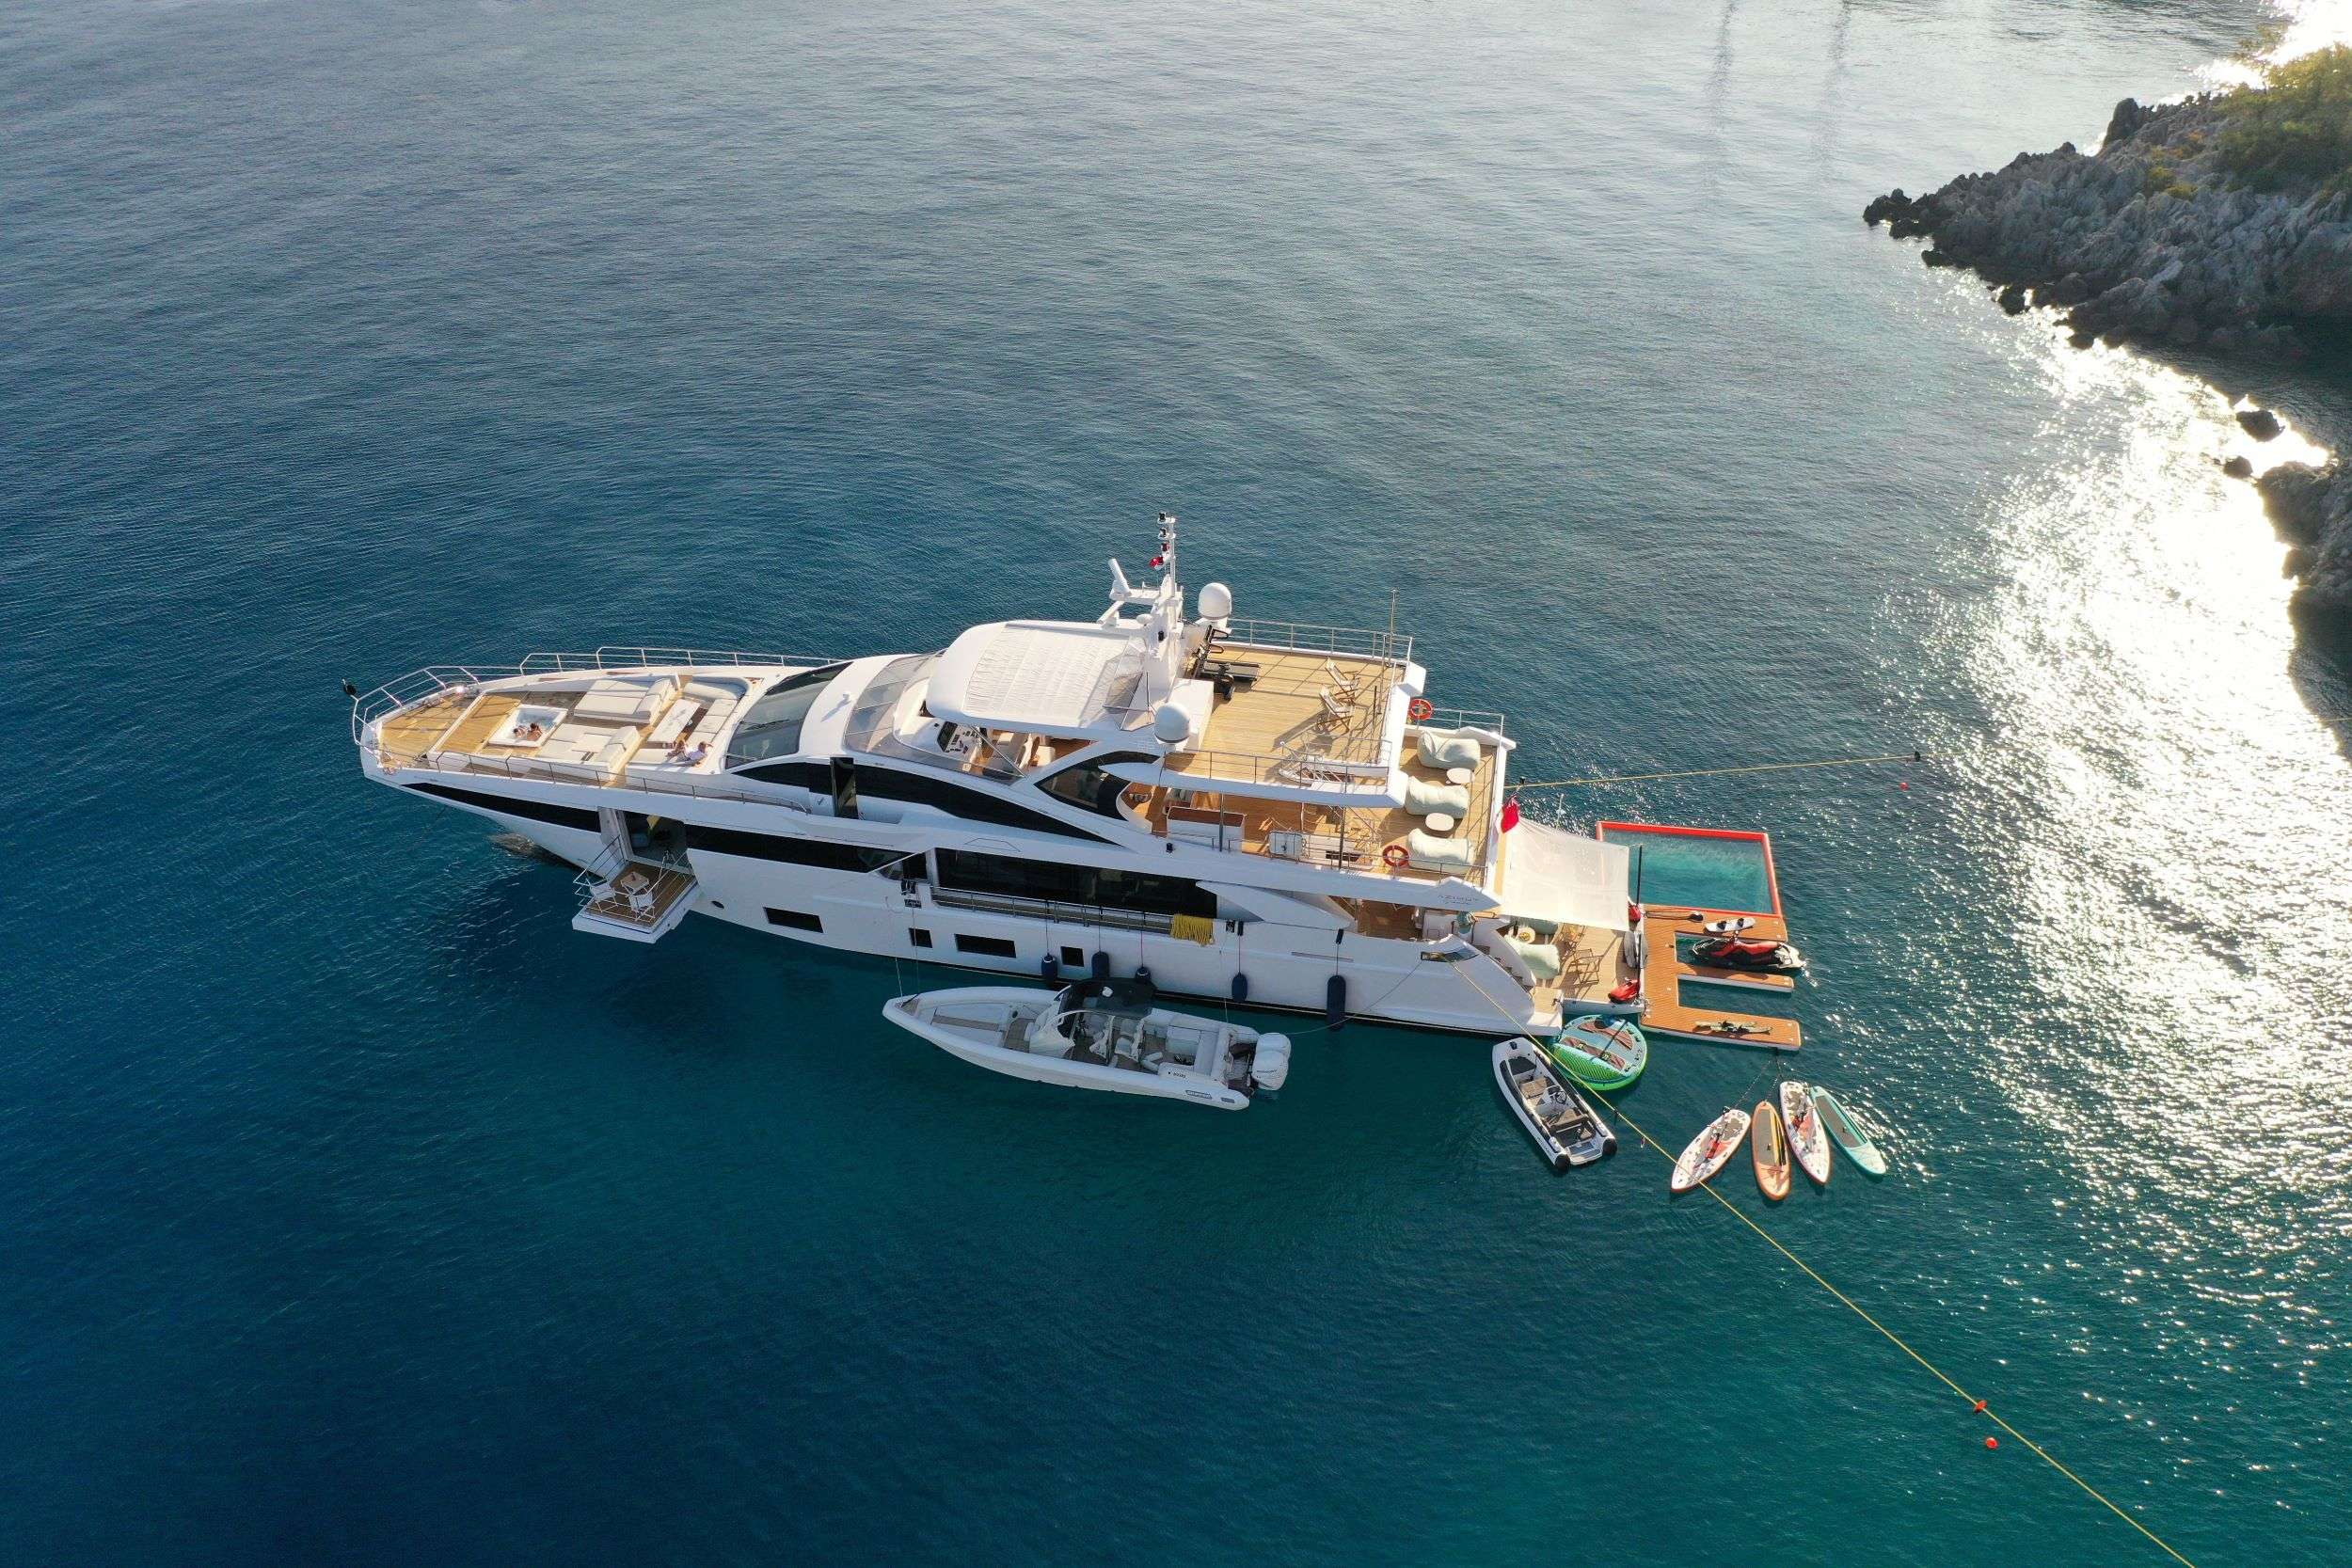 LOVE T - Yacht Charter Trapani & Boat hire in Summer: Greece | Winter: W. Med -Naples/Sicily 1